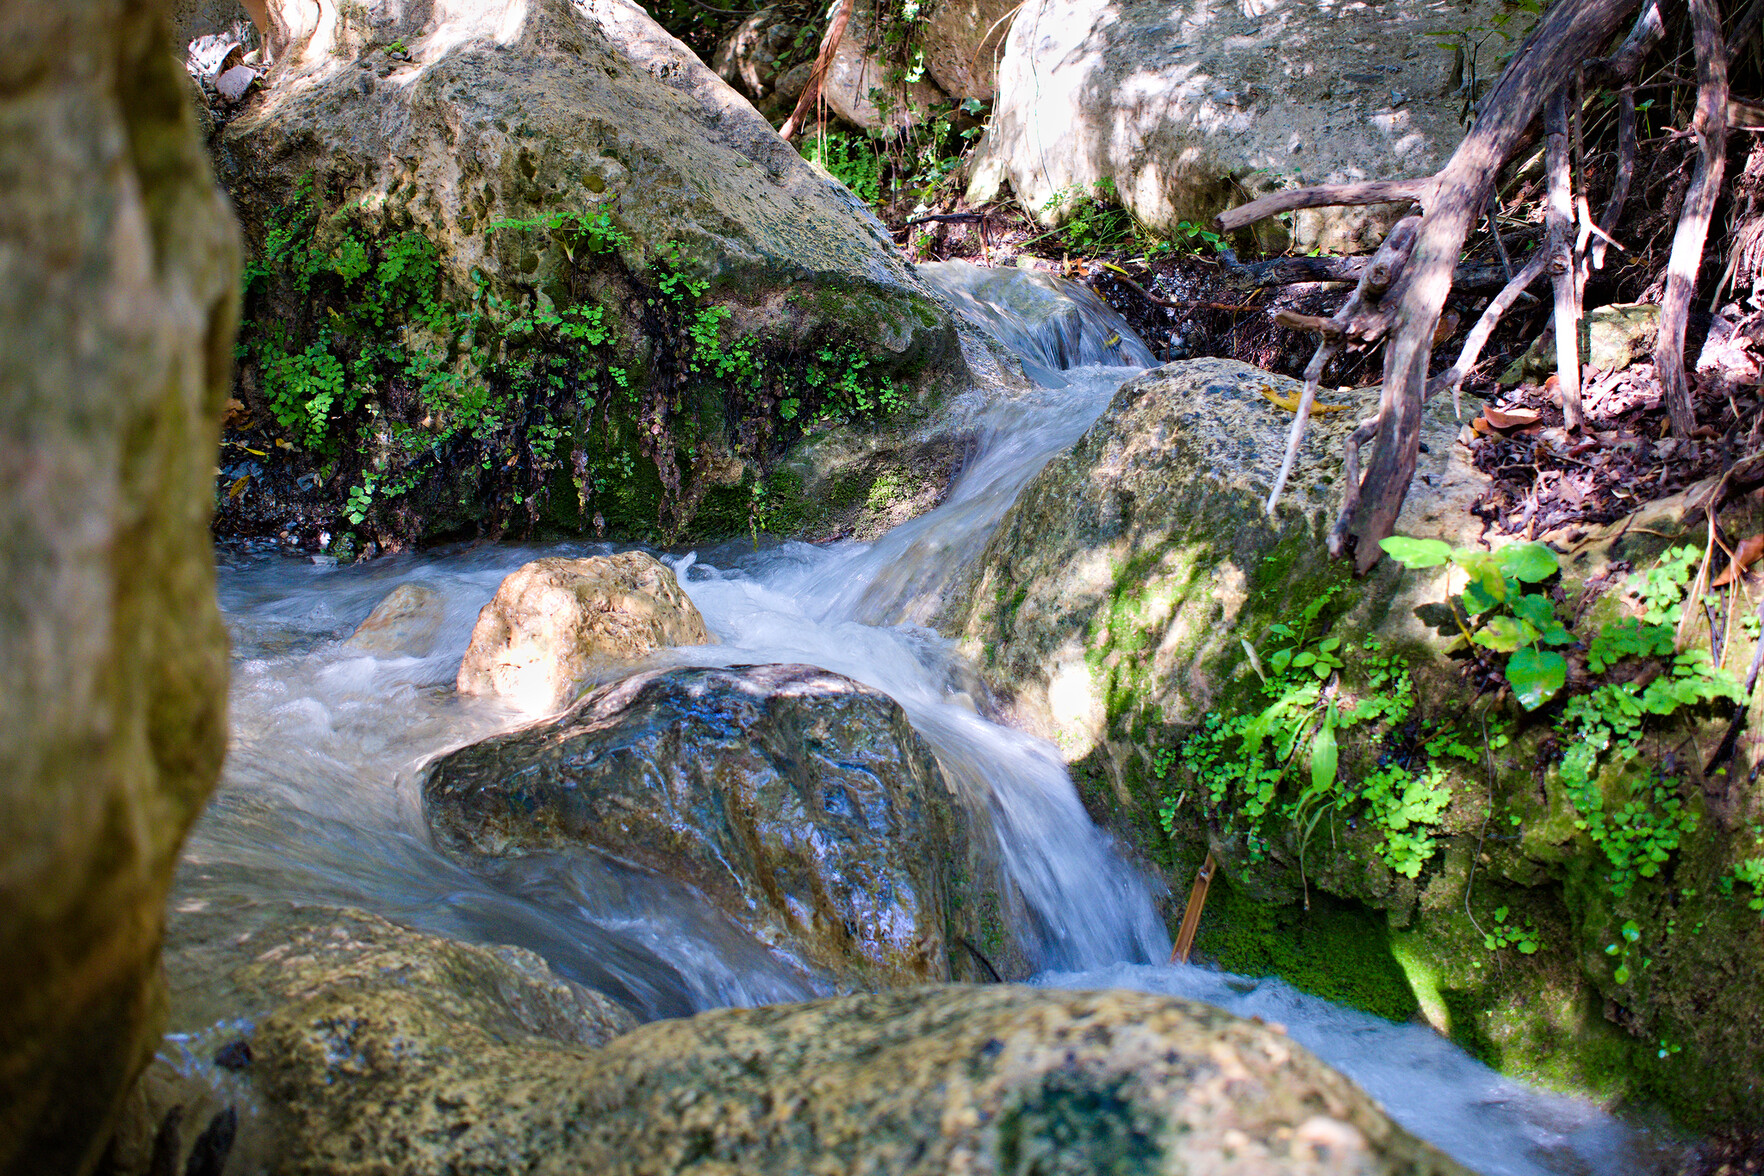 Water tumbles down a mountain stream lined with rocks and green ferns push out from the rocks